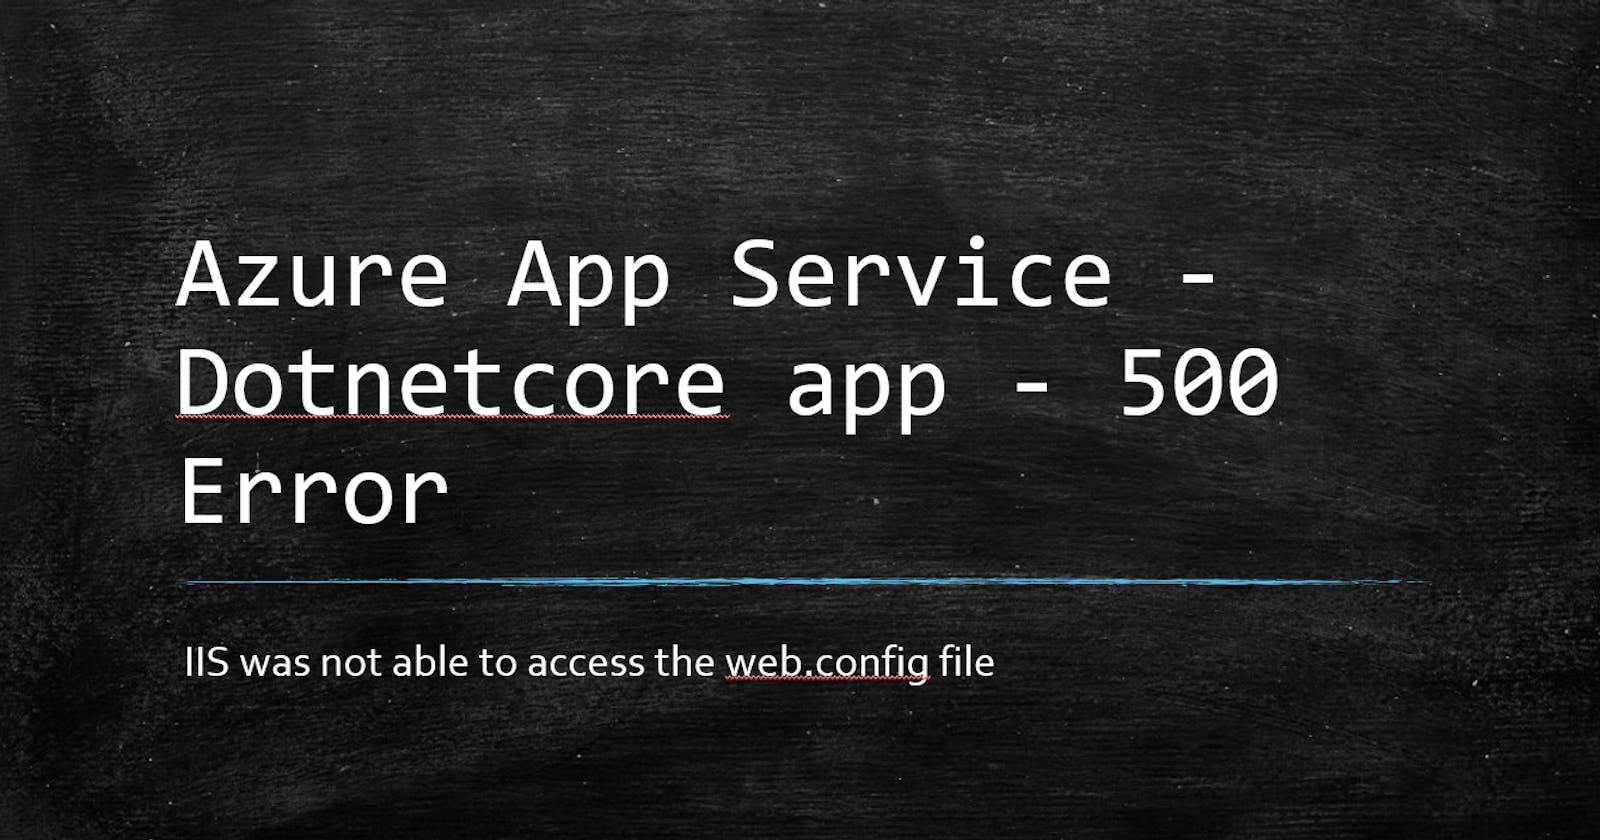 Azure App Service - Dotnetcore app - 500 Error - IIS was not able to access the webconfig file